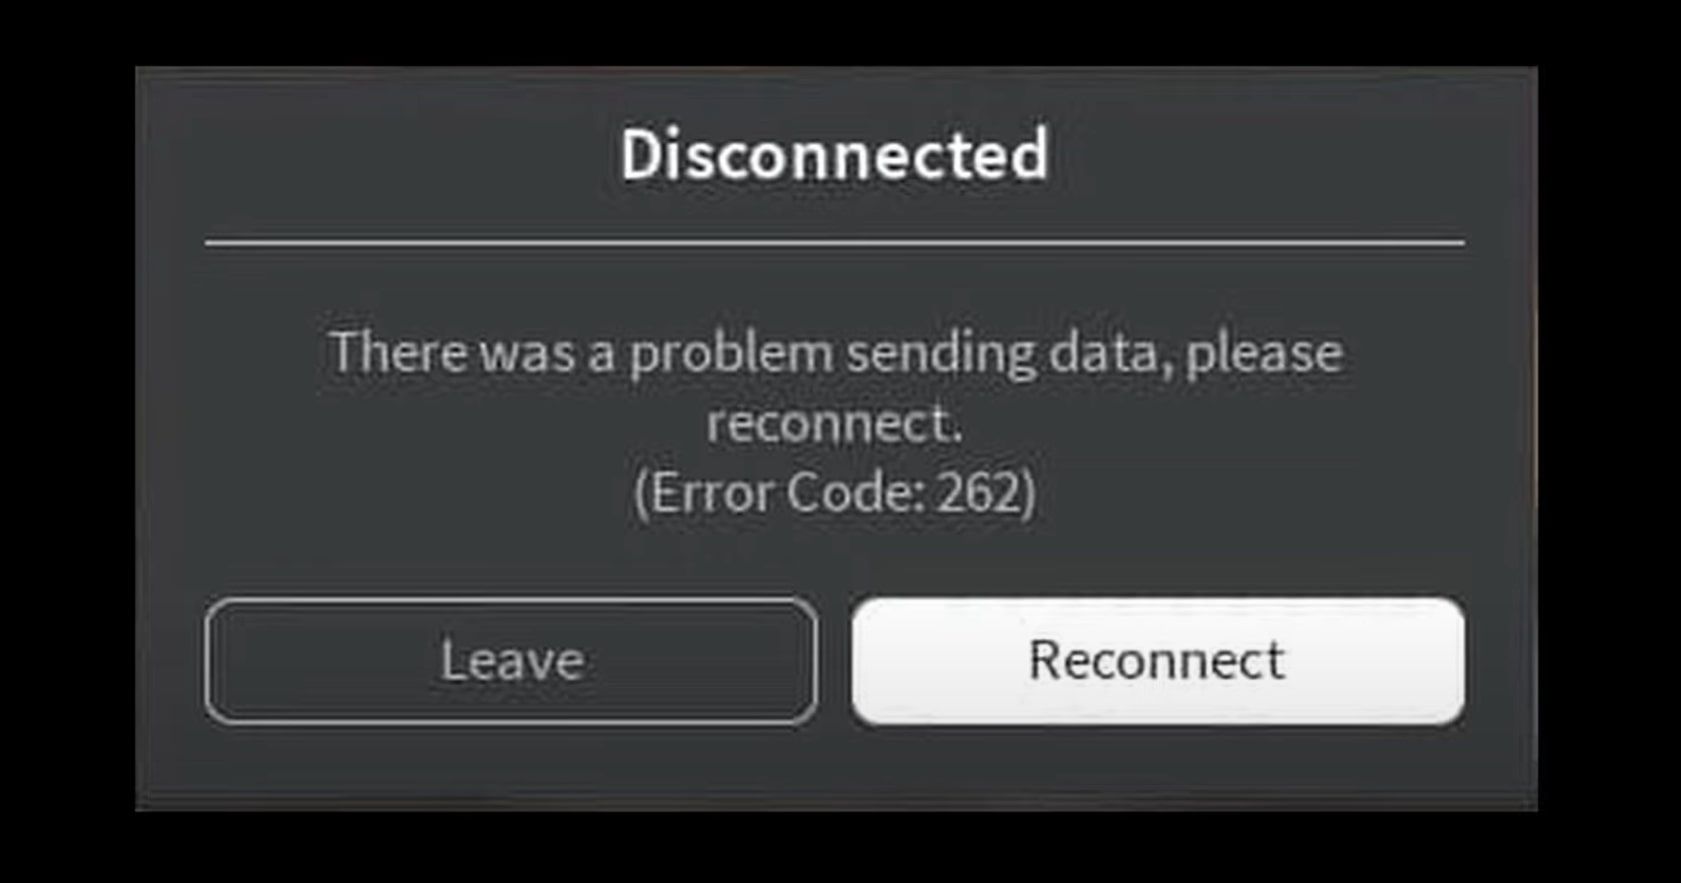 Connection lost server is unavailable